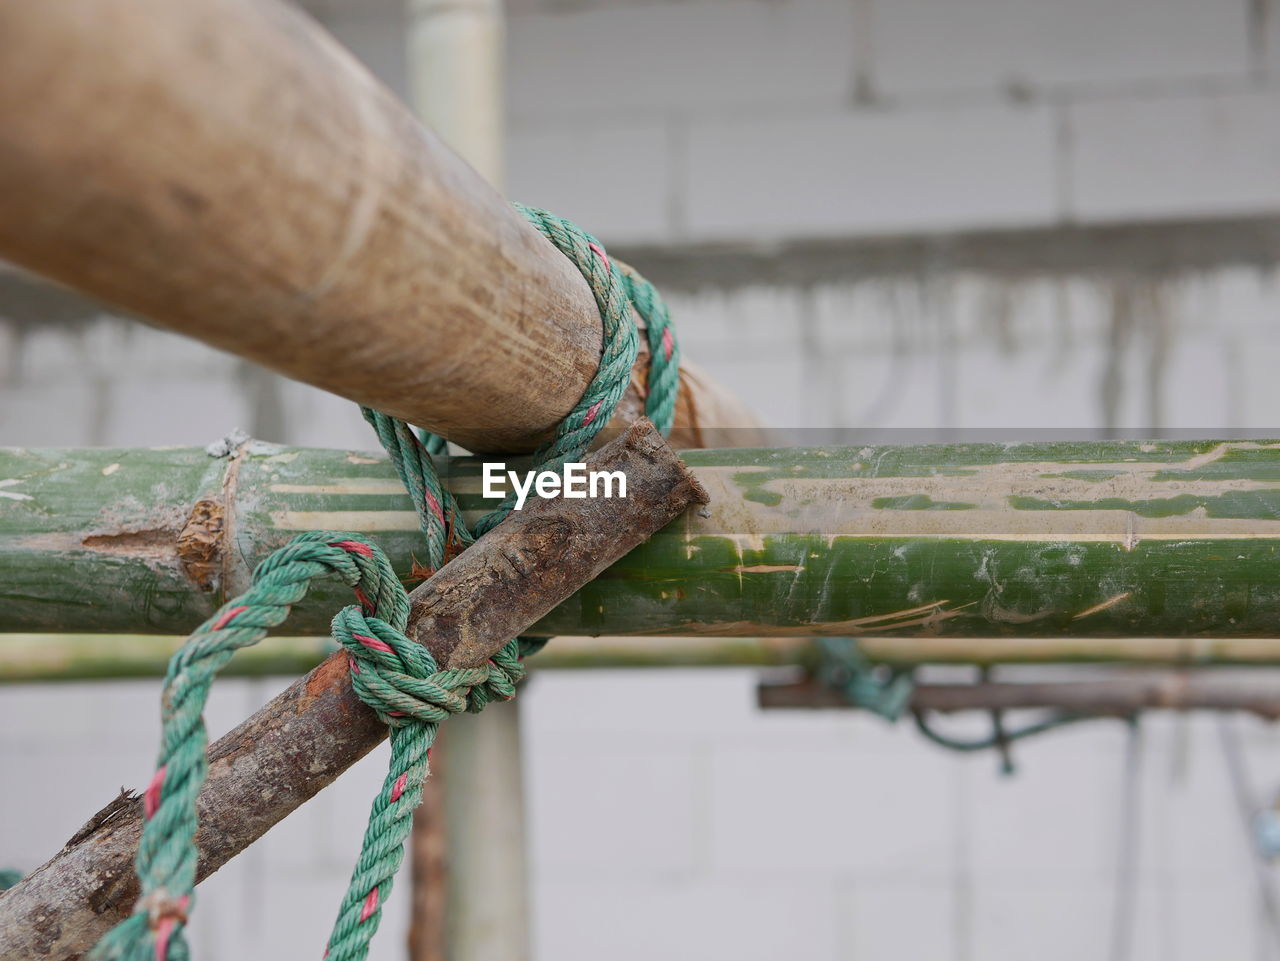 green, rope, strength, water, close-up, focus on foreground, day, tied up, hand, nautical vessel, outdoors, wood, protection, selective focus, branch, tied knot, nature